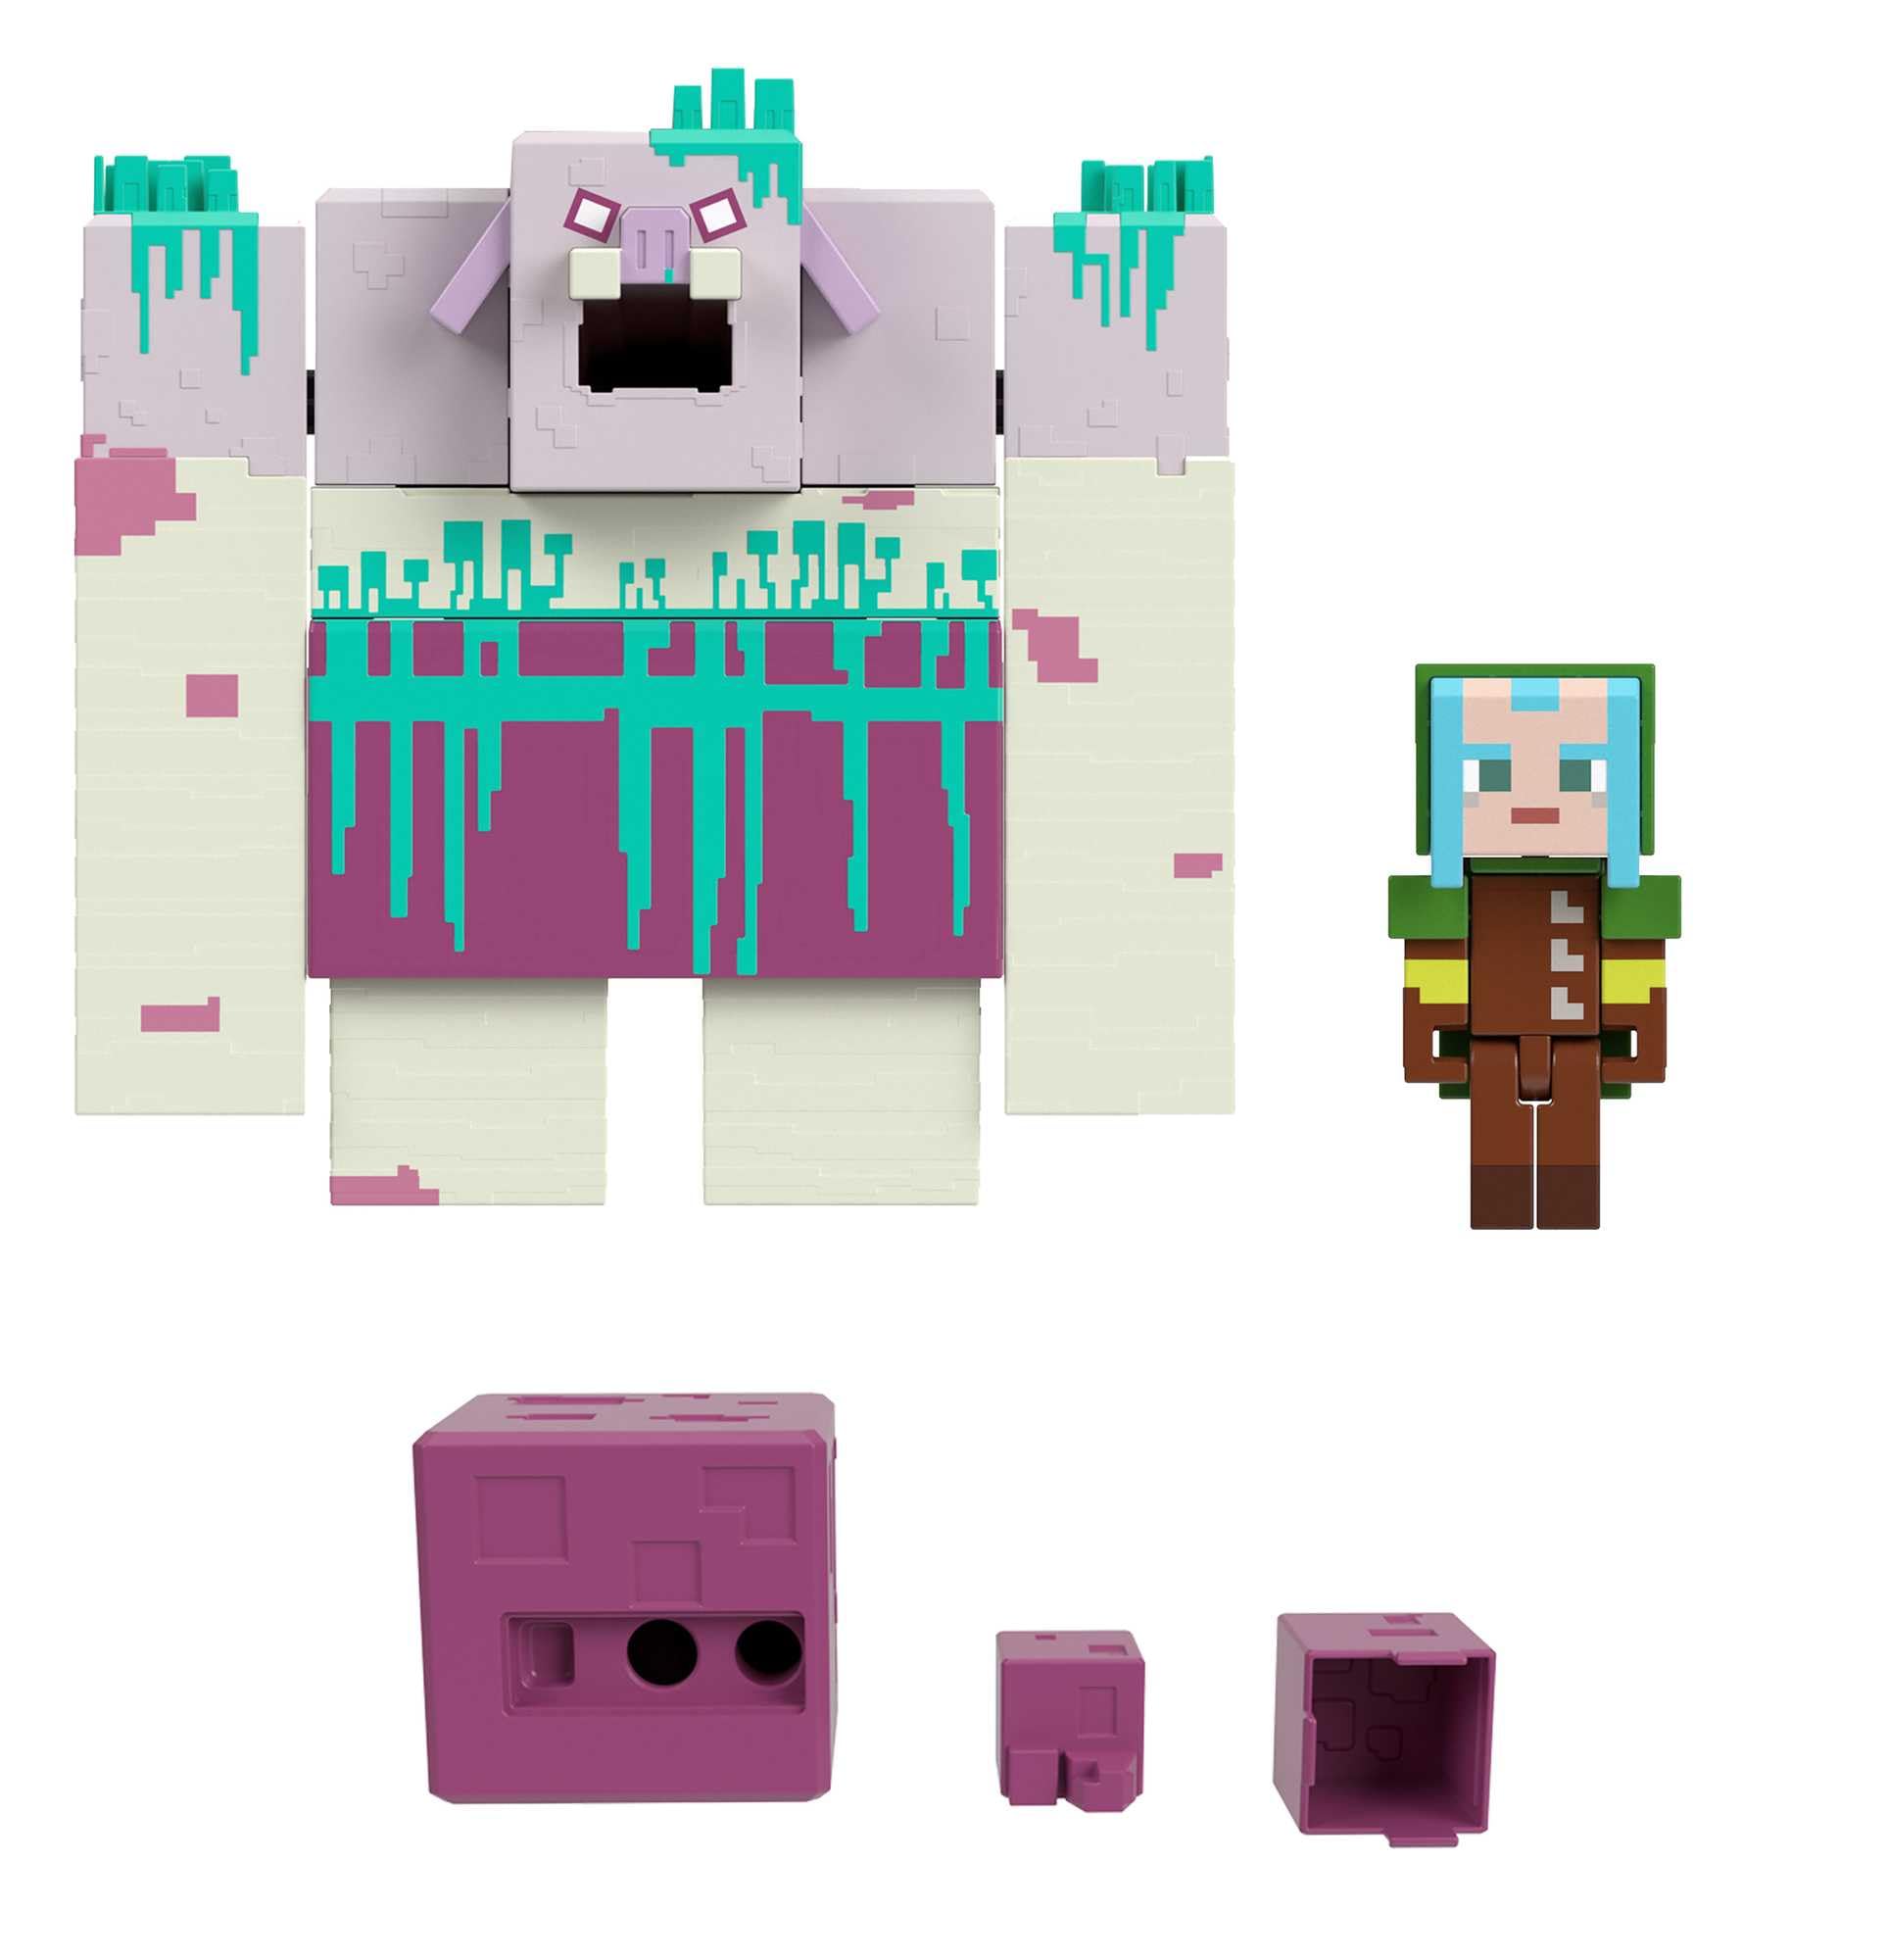 10" Mattel Minecraft Legends Devourer Action Figure w/ Slime Attack Action, 3.25" Ranger Figure and Accessories $20.15 or Less + Free Shipping w/ Prime or on $35+